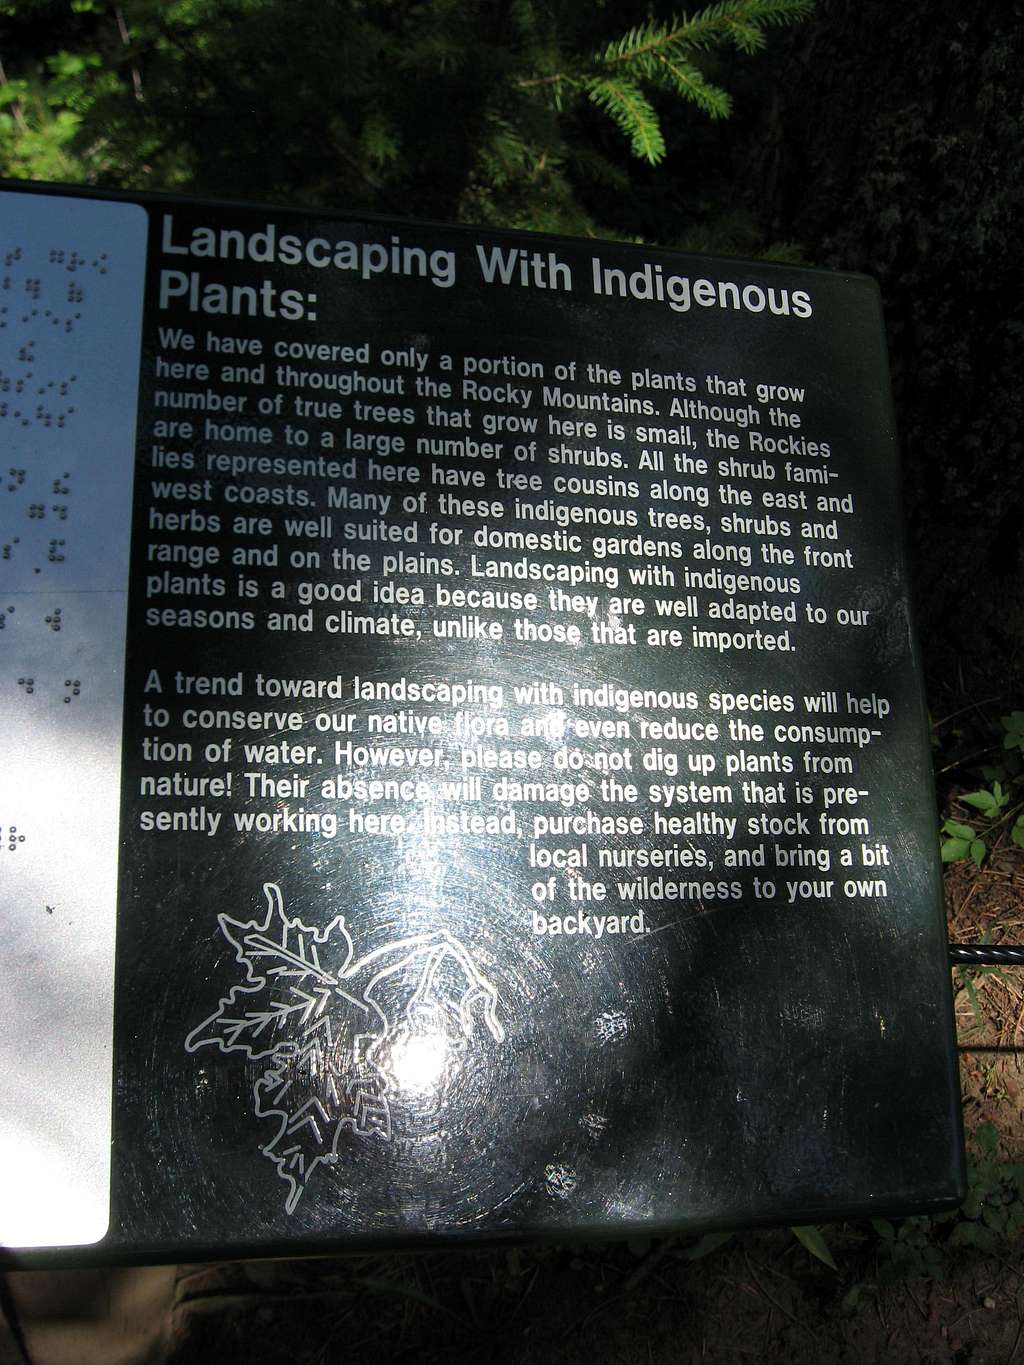 Landscaping with indigenous plants